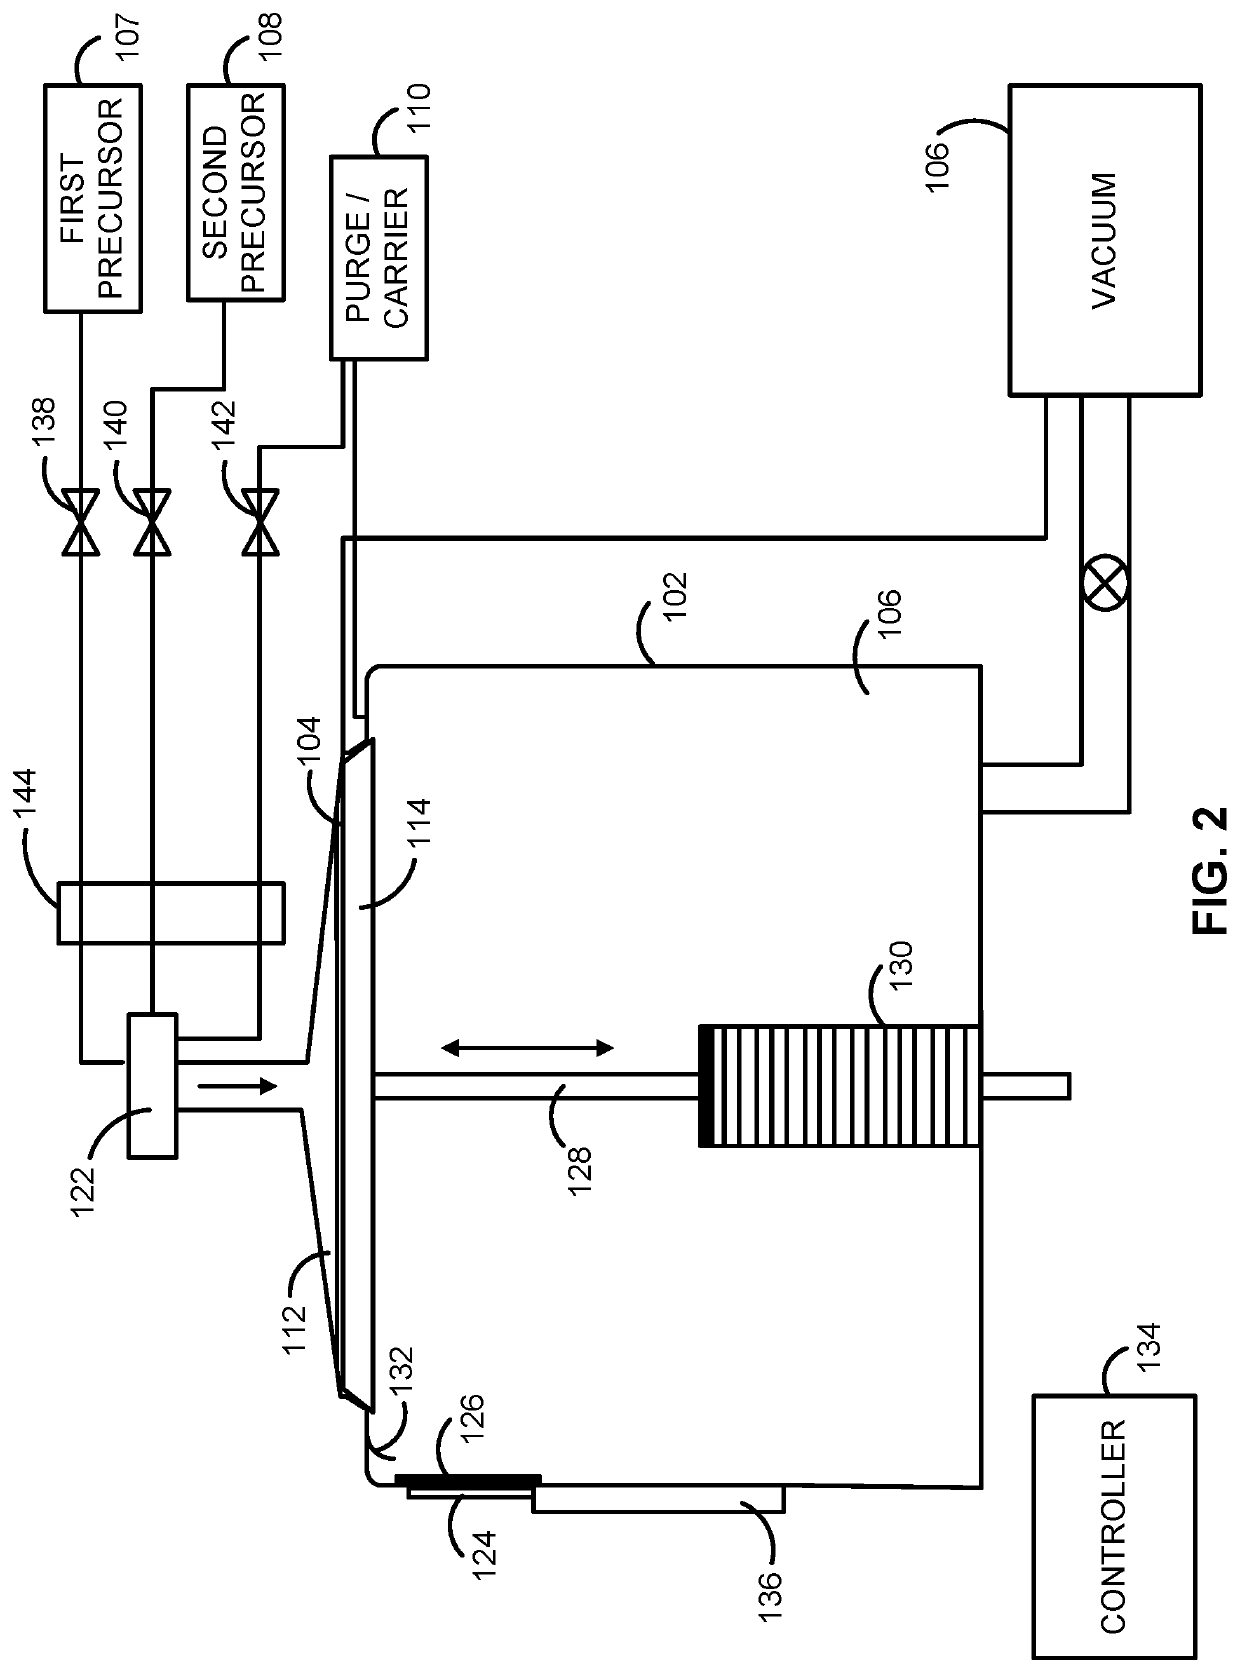 Gas-phase chemical reactor and method of using same